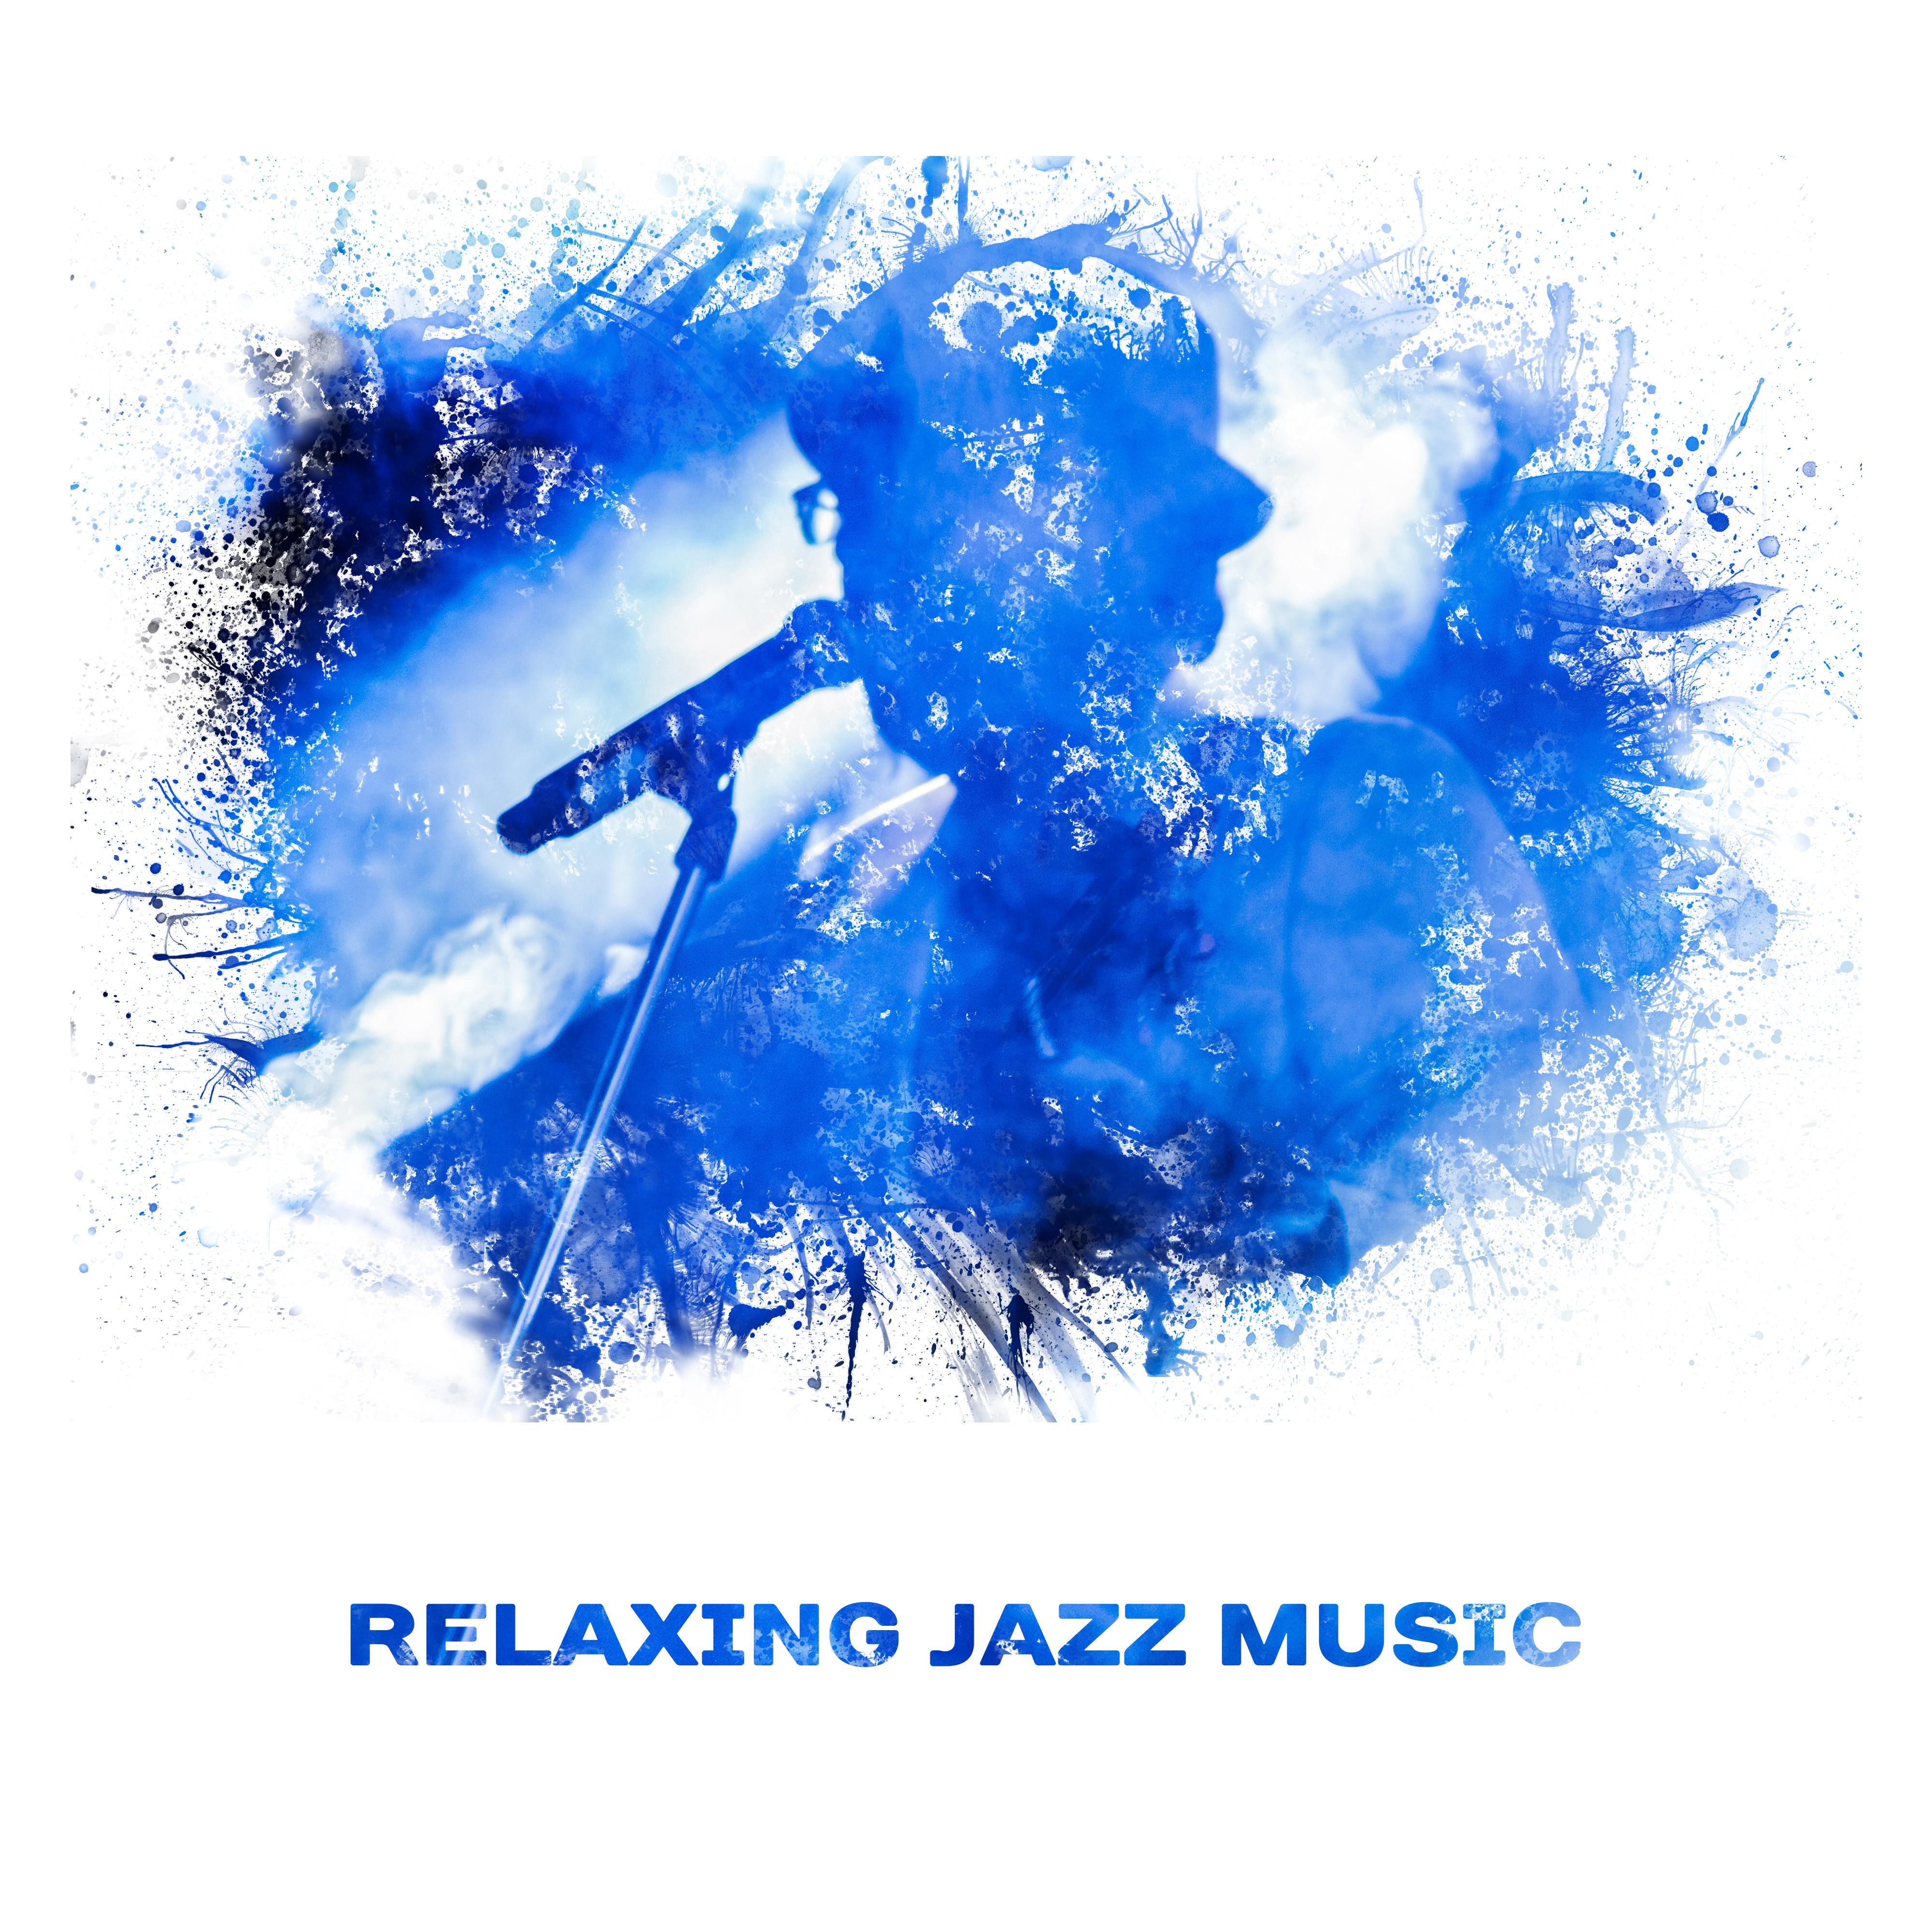 Relaxing Jazz Music  Smooth Sounds to Rest Your Mind, Jazz Music to Calm Down, Relax Yourself